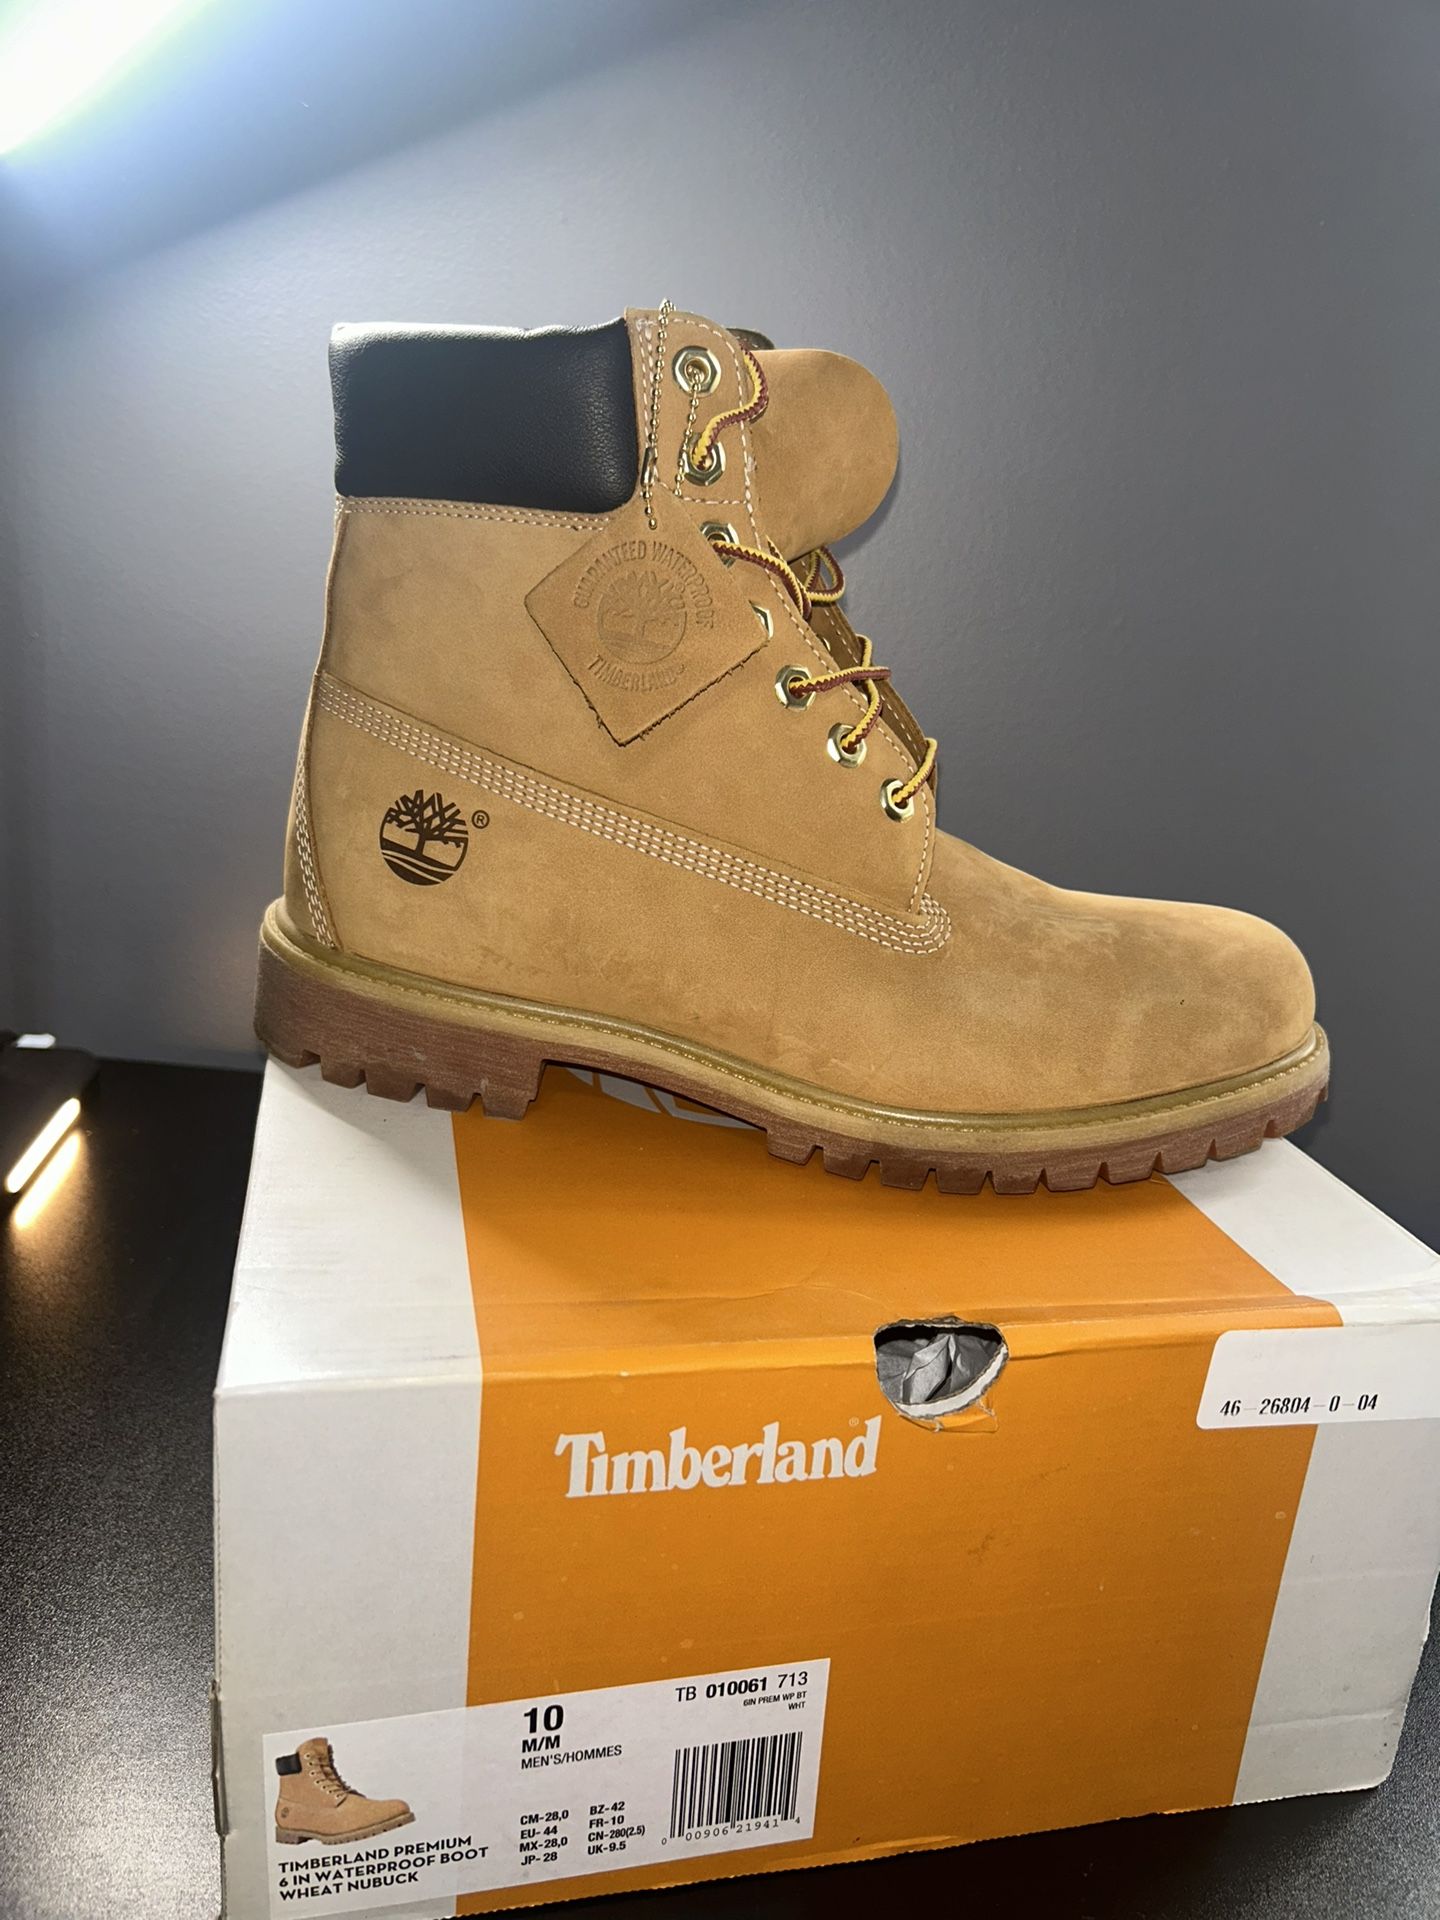 Wheat Timbs size 10 